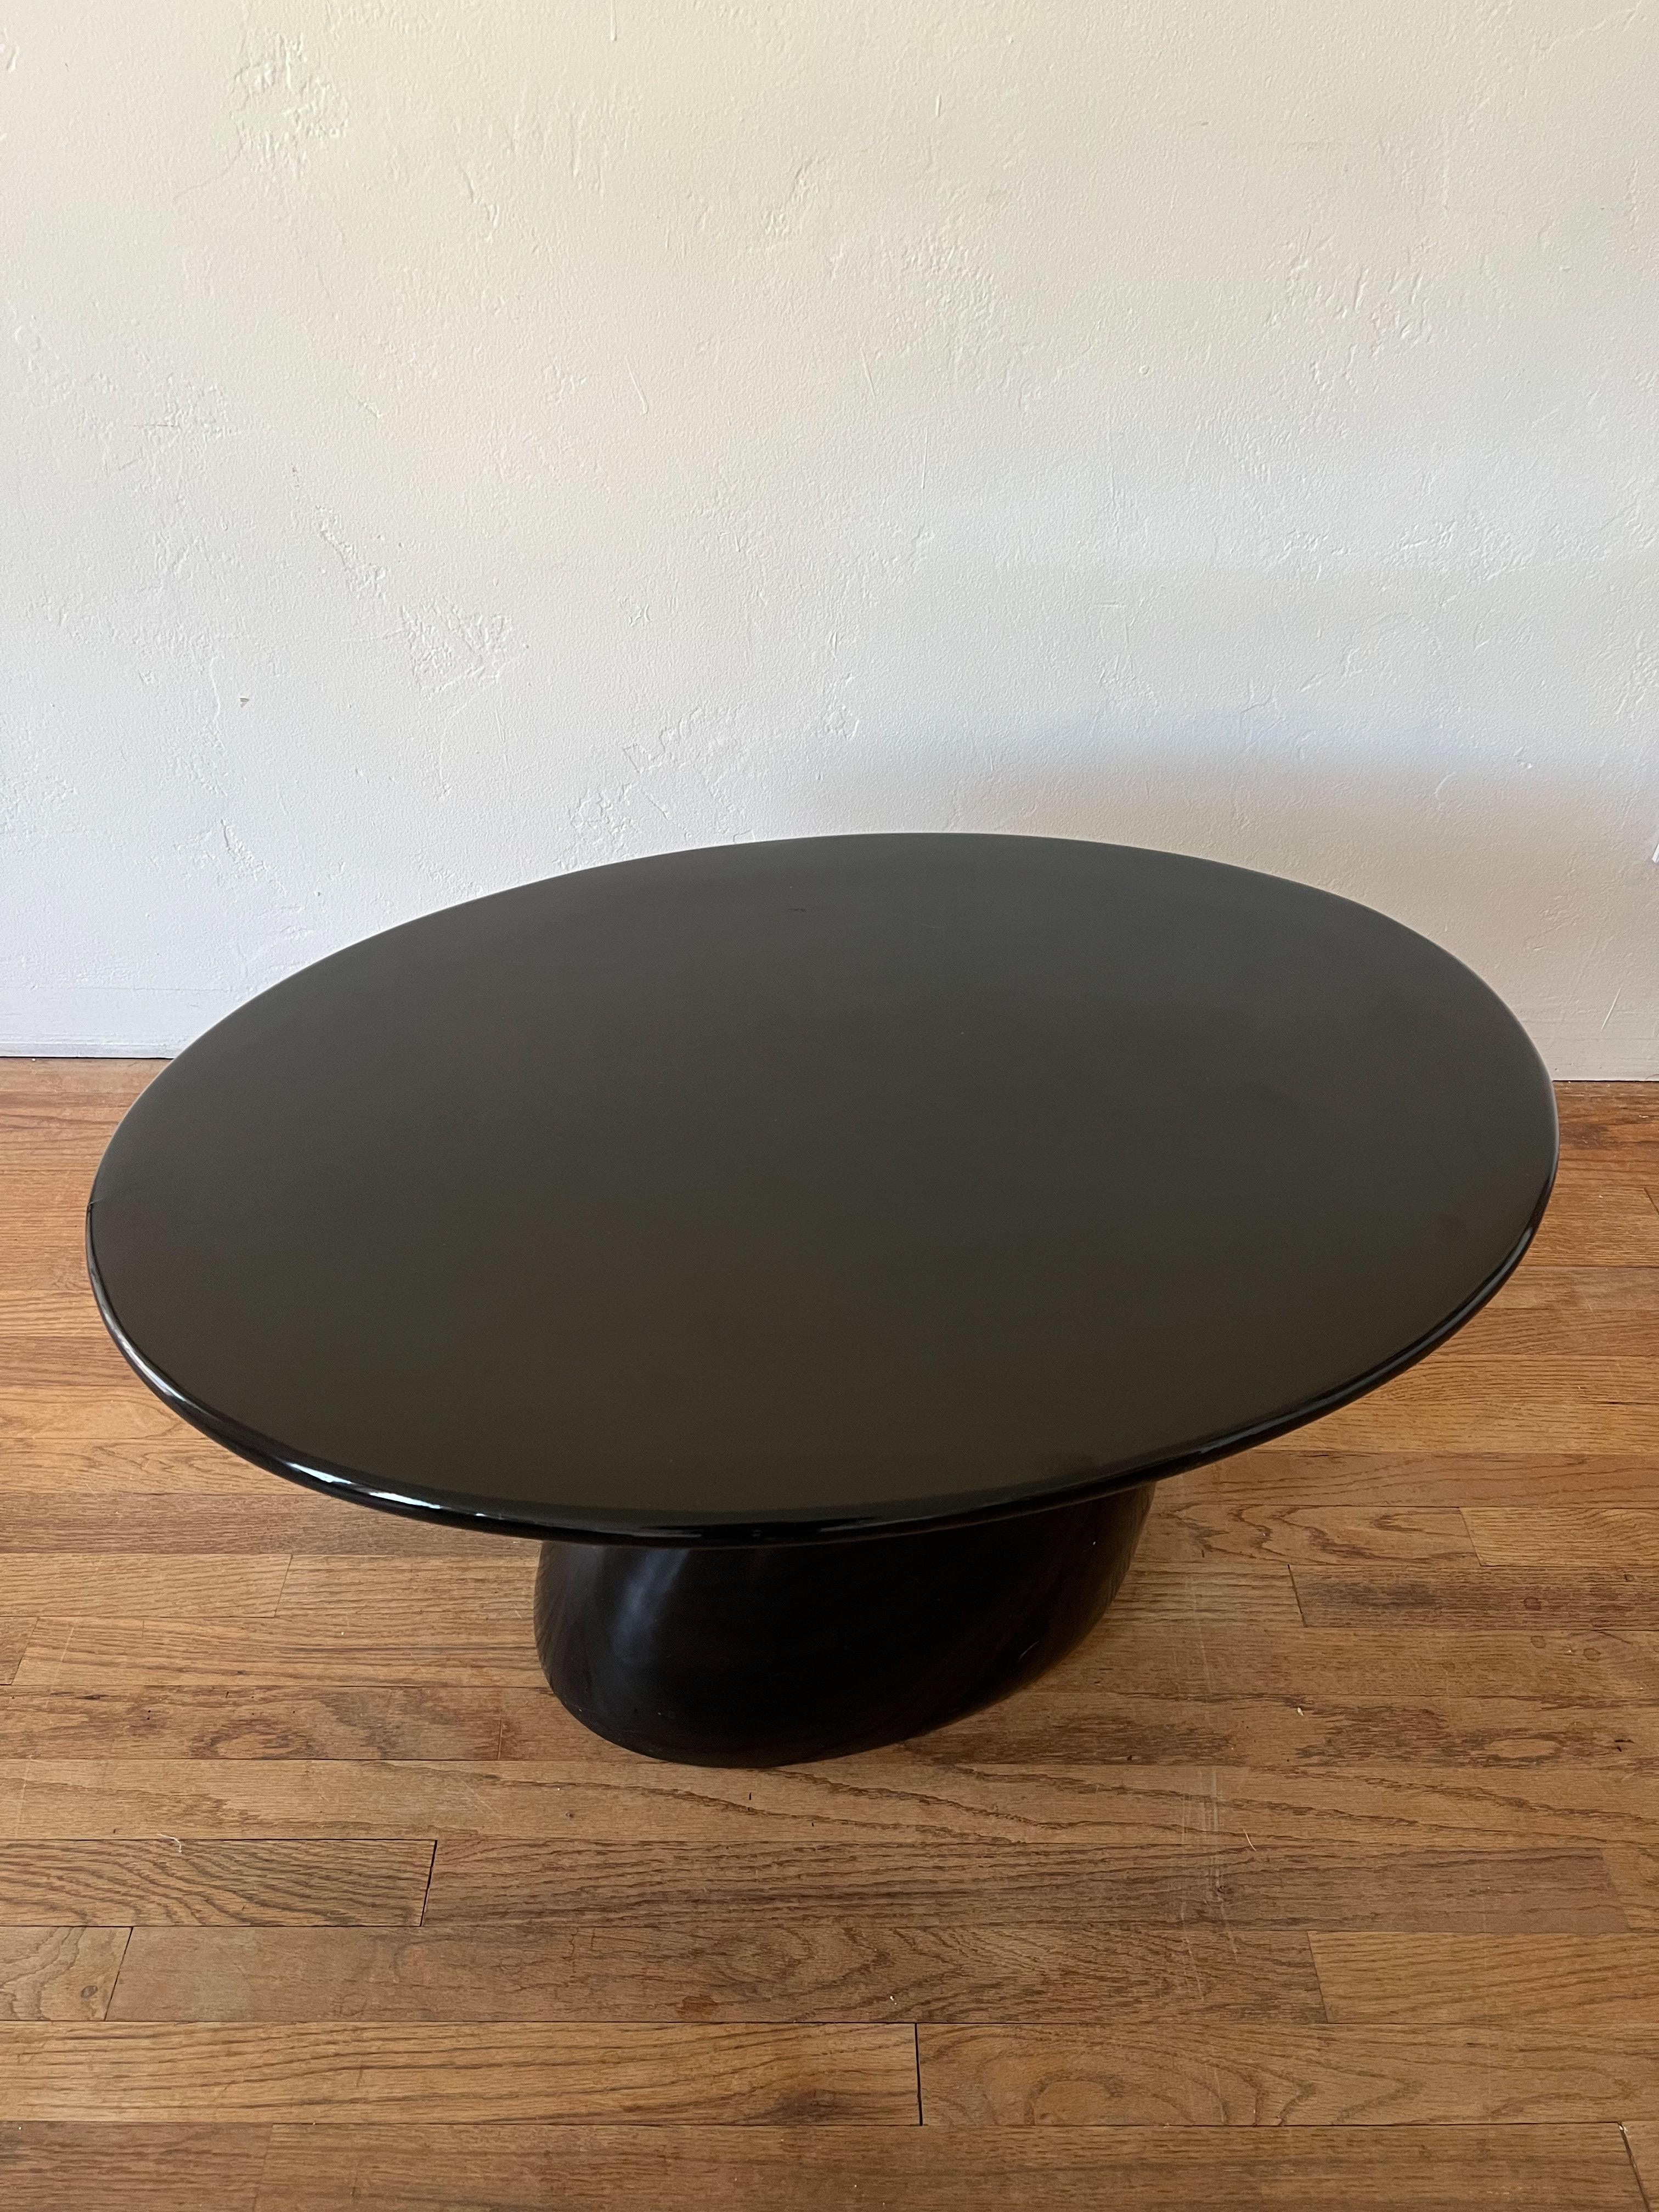 Space Age “Parabel” Style Side Table Attributed to Eero Aarnio For Sale 4